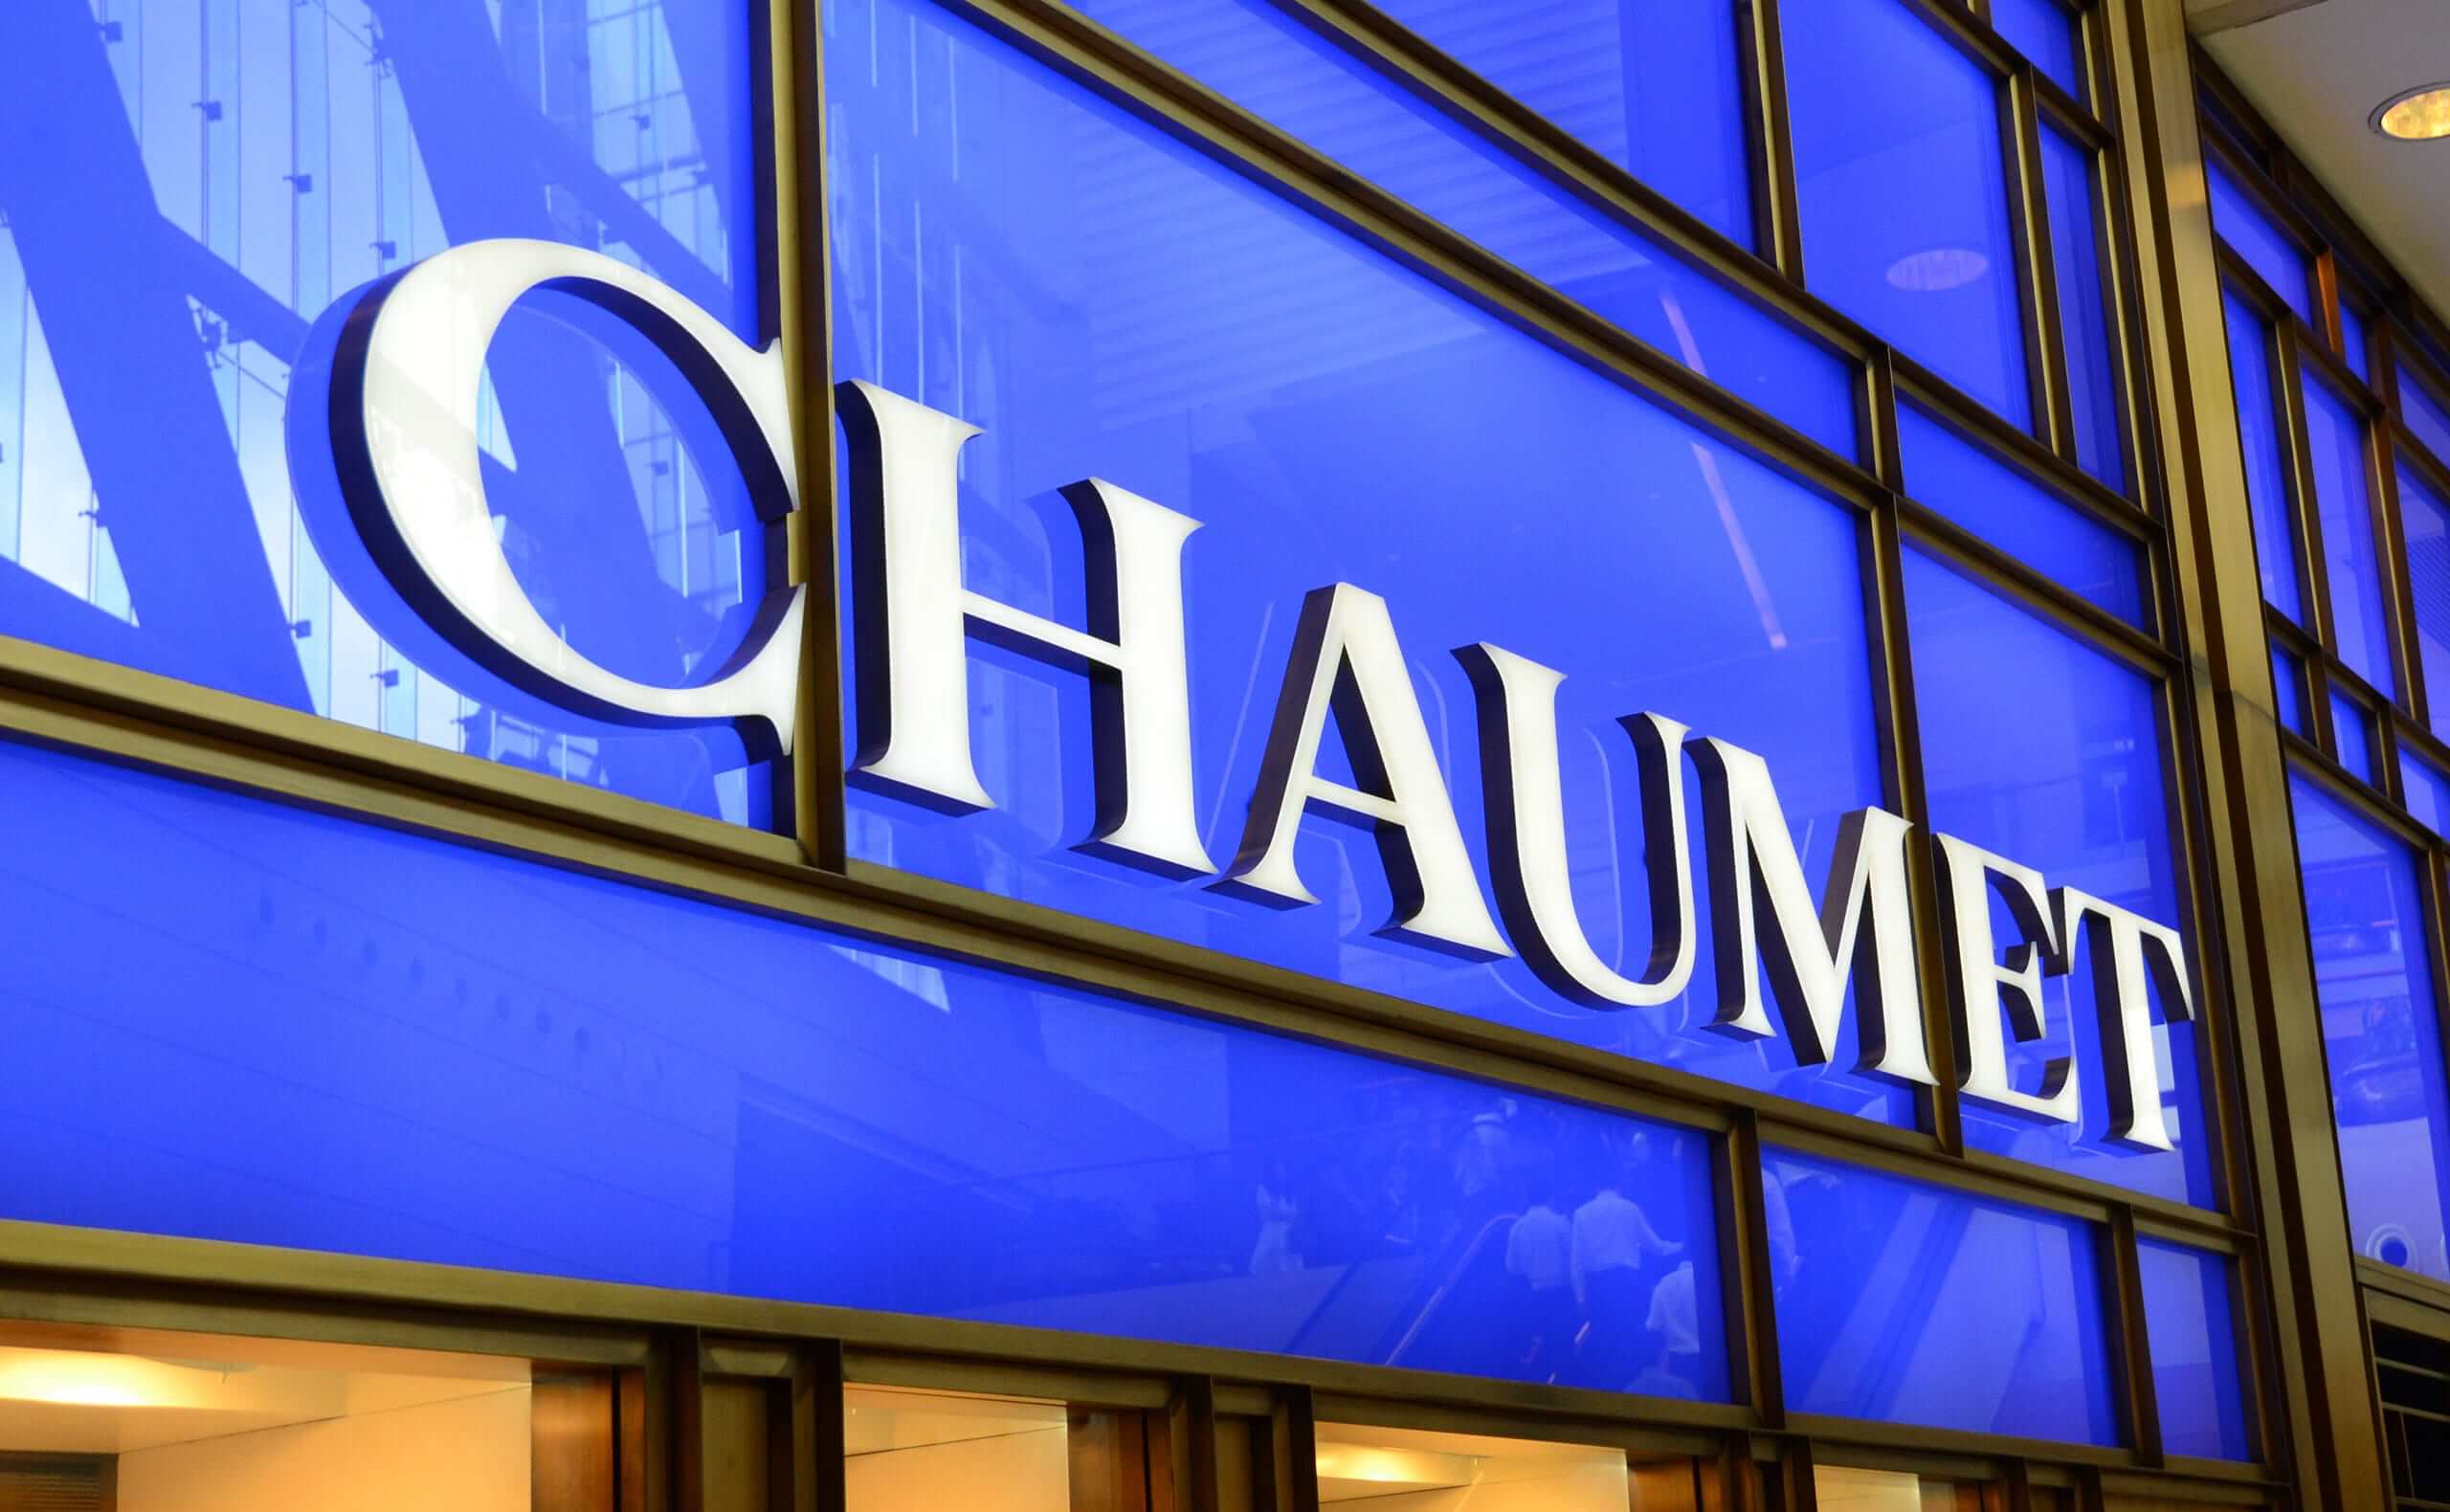 Metal Front Lit Trimless Channel Letters For Chaumet